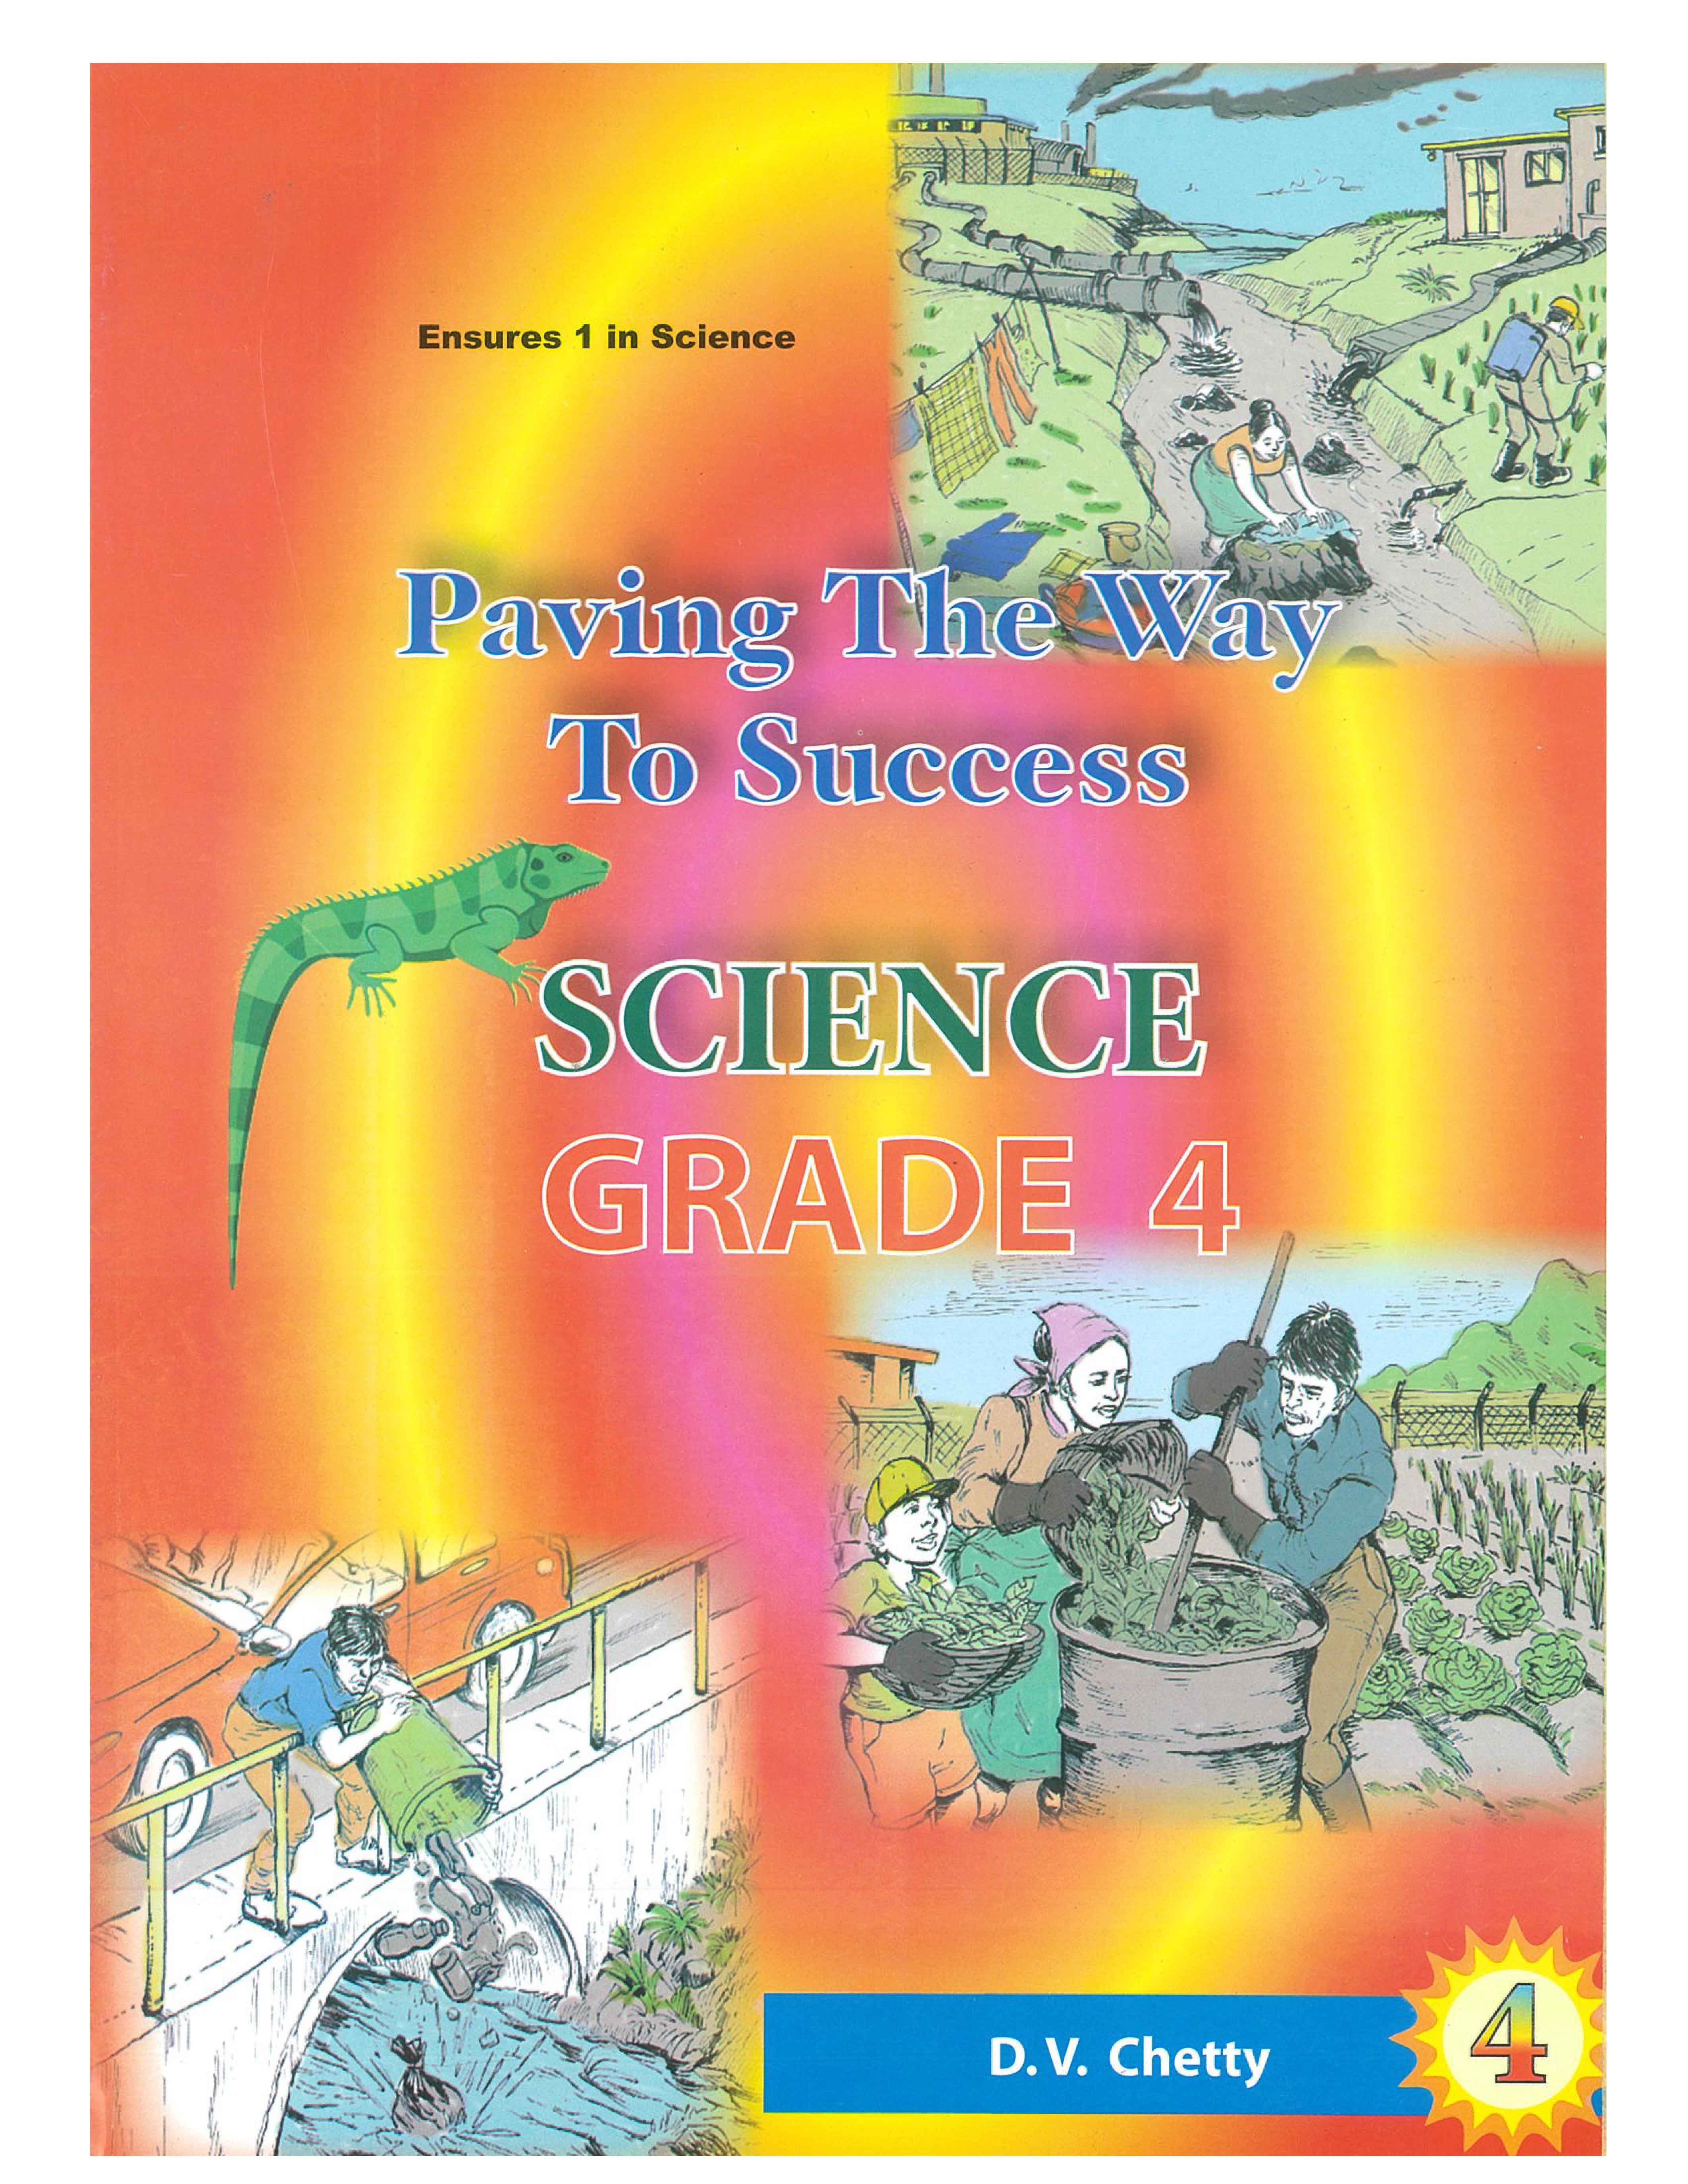 ENSURES A PAVING THE WAY TO SUCCESS SCIENCE GRADE 4